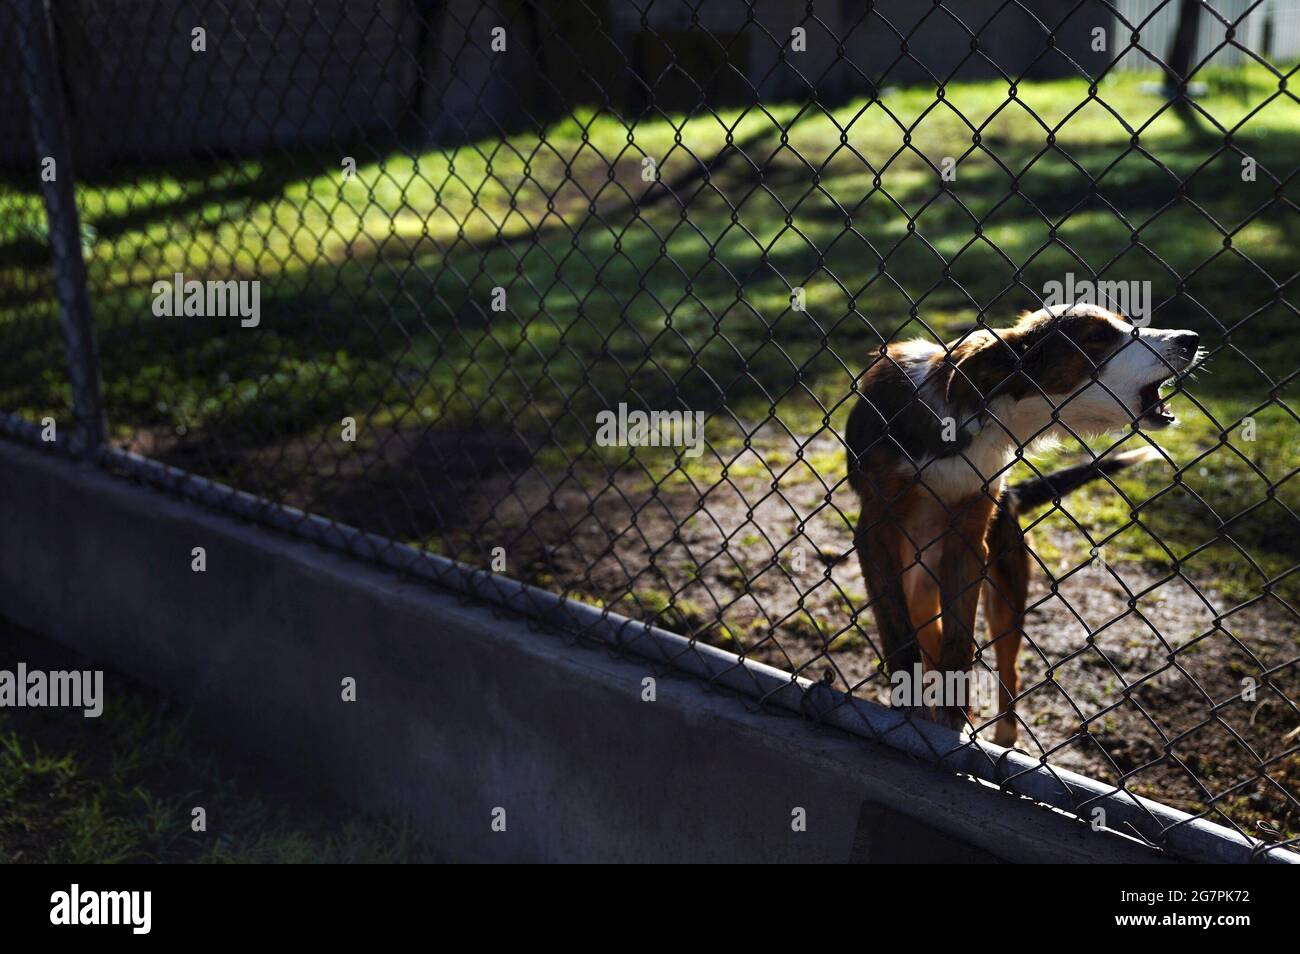 A stray dog barks at the 'Doggies of Santa Lucia' shelter, run by the Mexican army at an unoccupied kindergarten building, which was created after the Mexico City's new airport architects and workers noticed a large amount of stray dogs wandering near the construction site, in Zumpango de Ocampo, Mexico July 14, 2021. Picture taken July 14, 2021. REUTERS/Toya Sarno Jordan Stock Photo